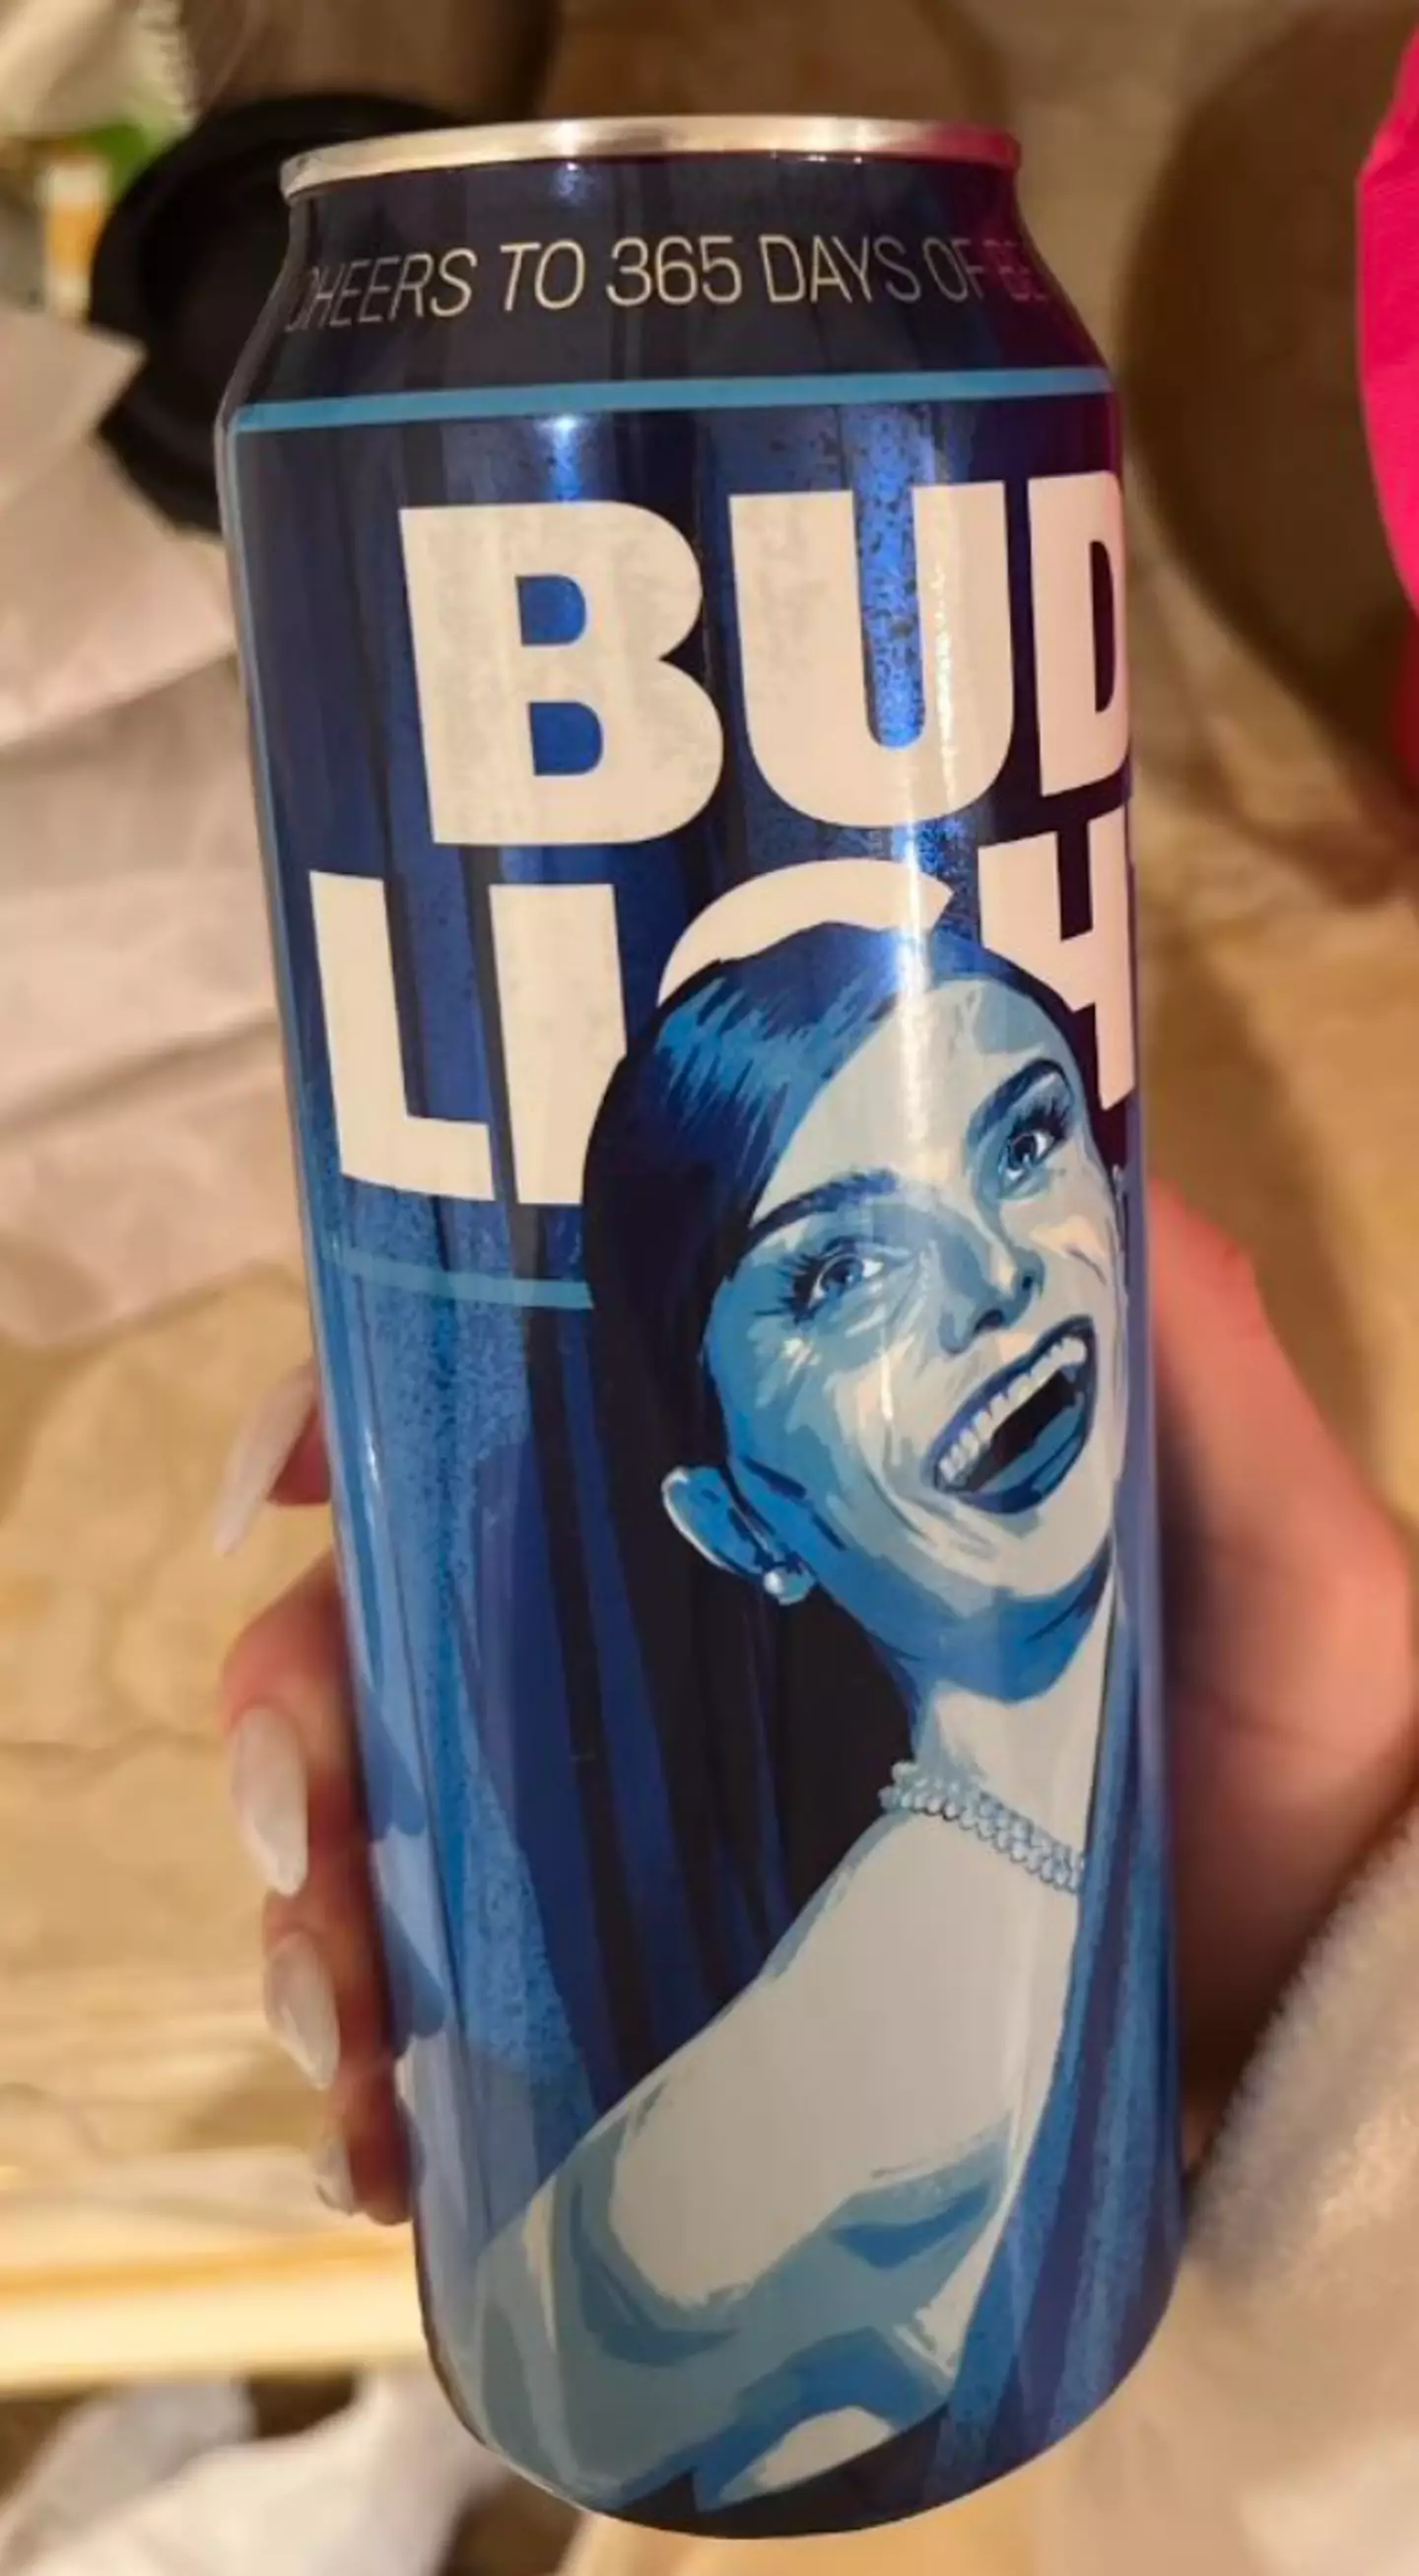 Bud Light sent Dylan Mulvaney a can to mark 365 Days of Girlhood.